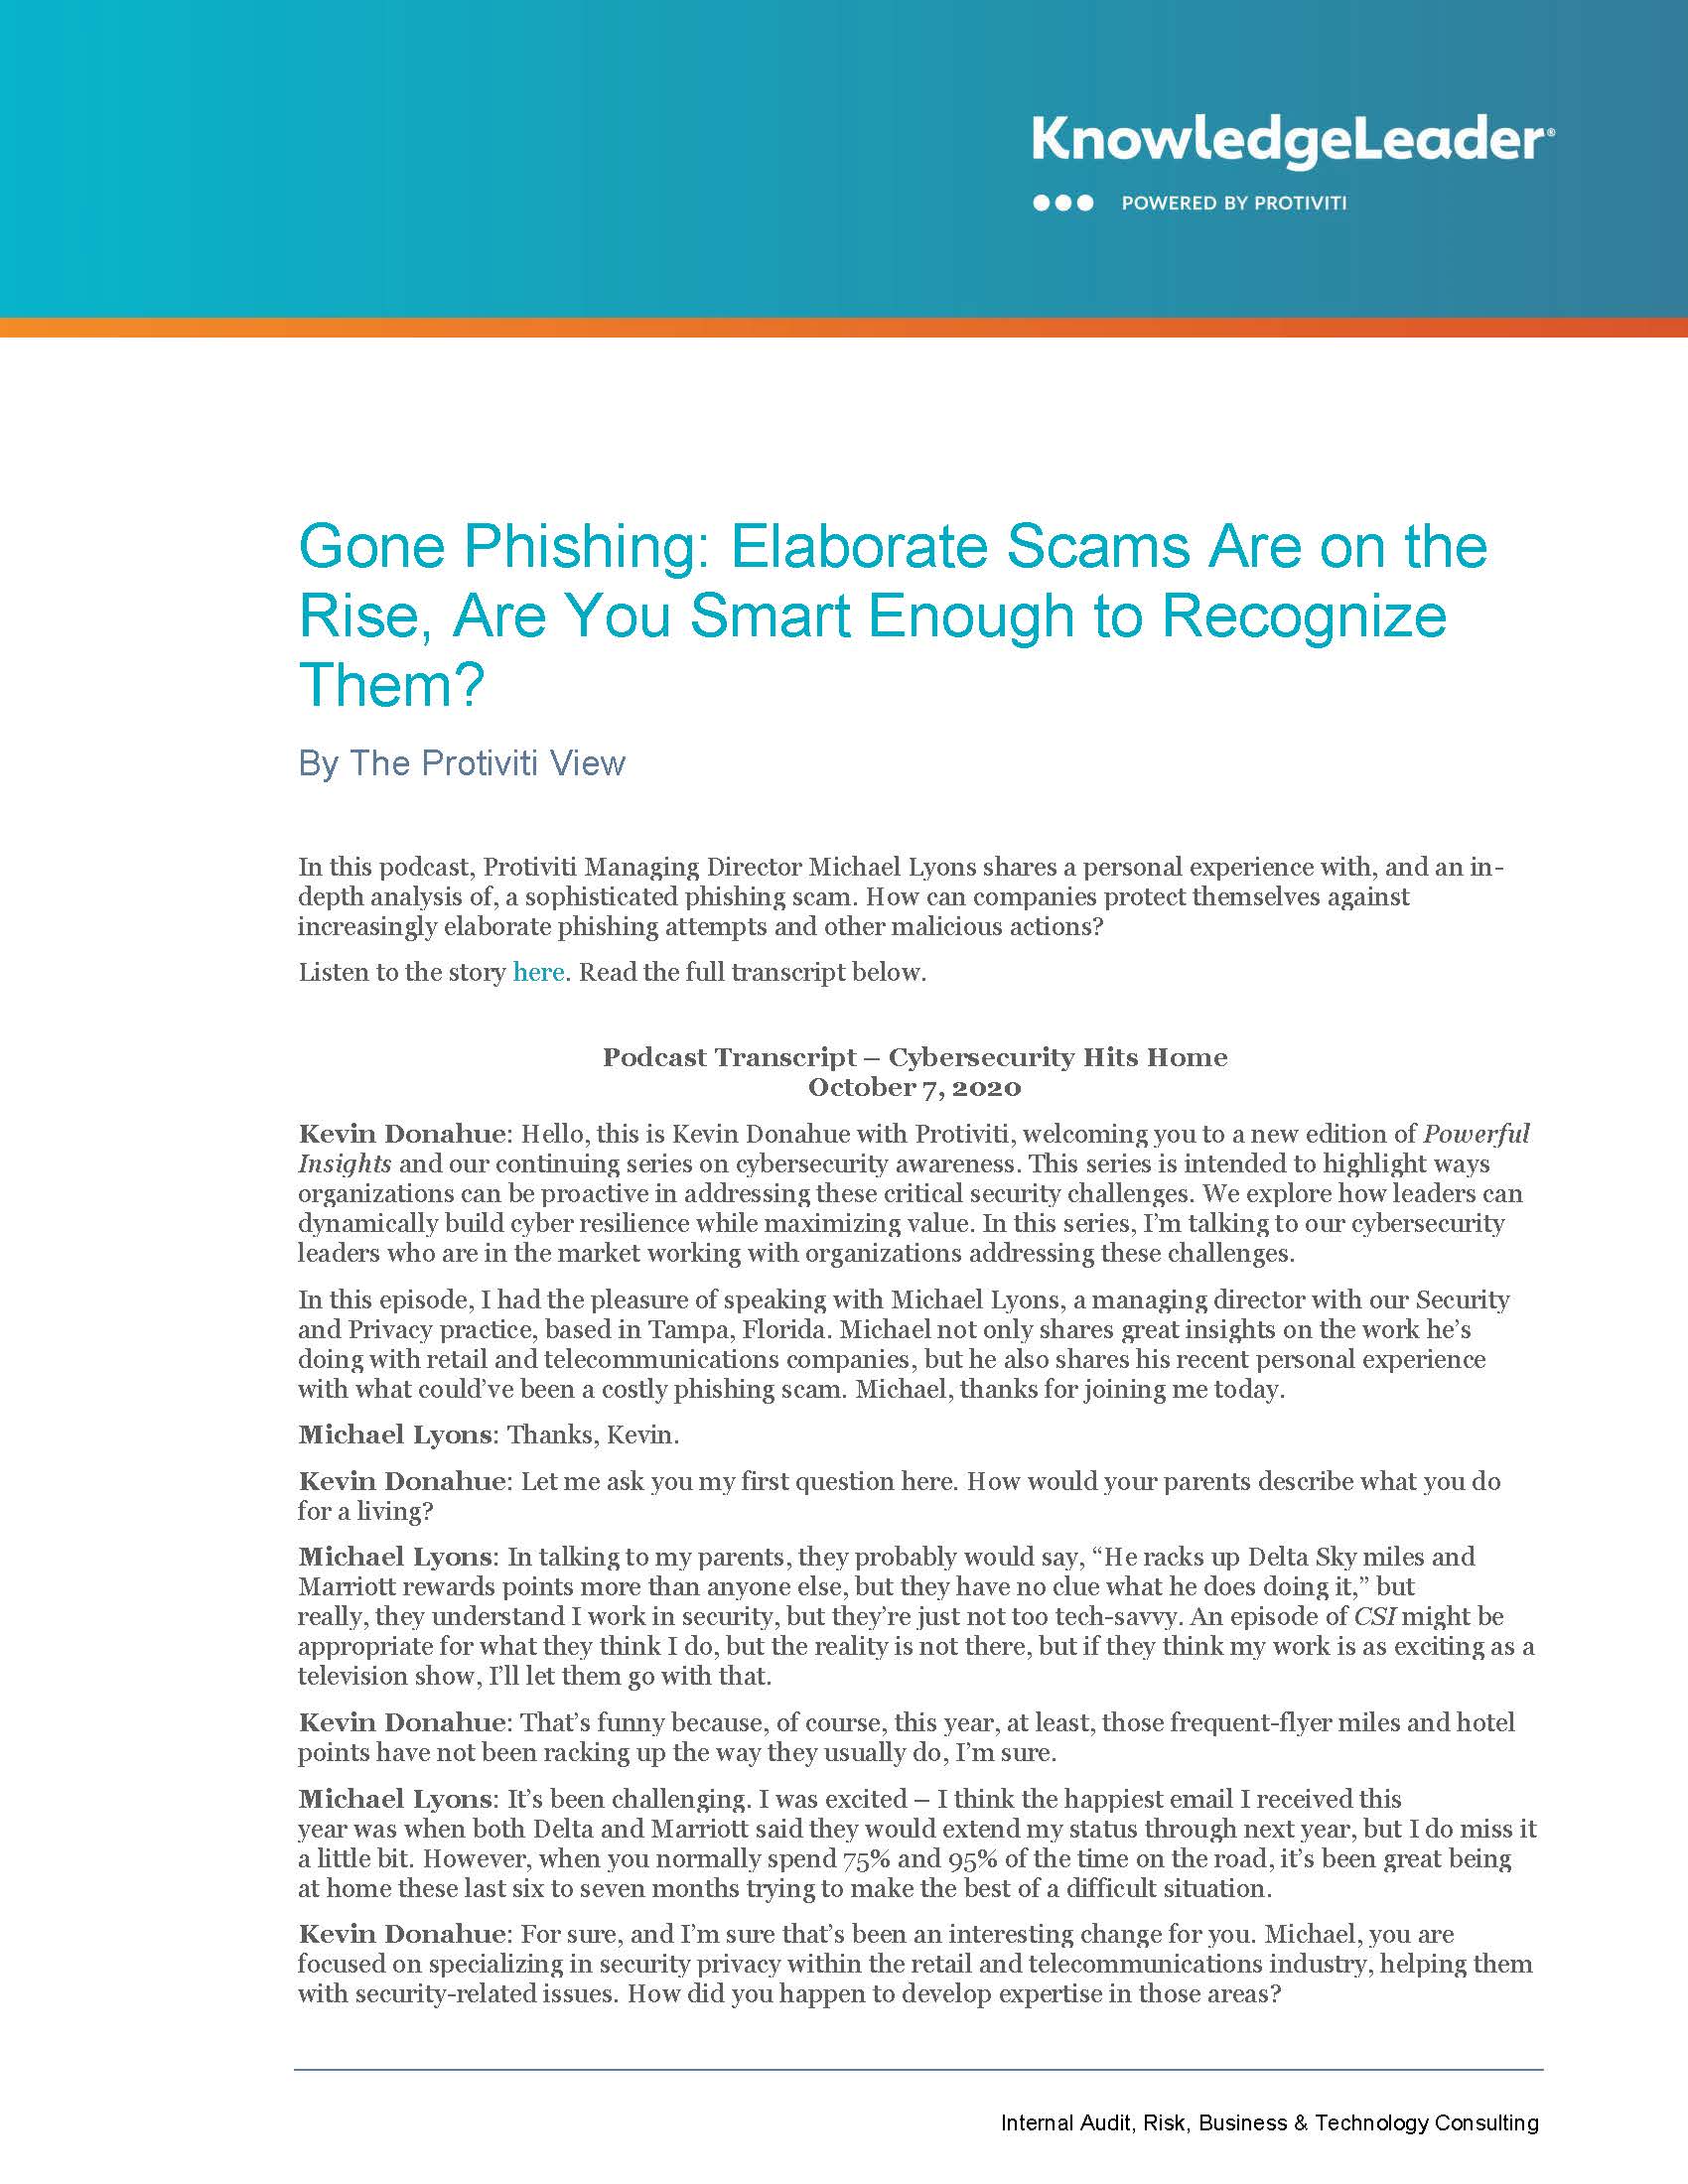 Screenshot of the first page of Gone Phishing Elaborate Scams Are on the Rise, Are You Smart Enough to Recognize Them